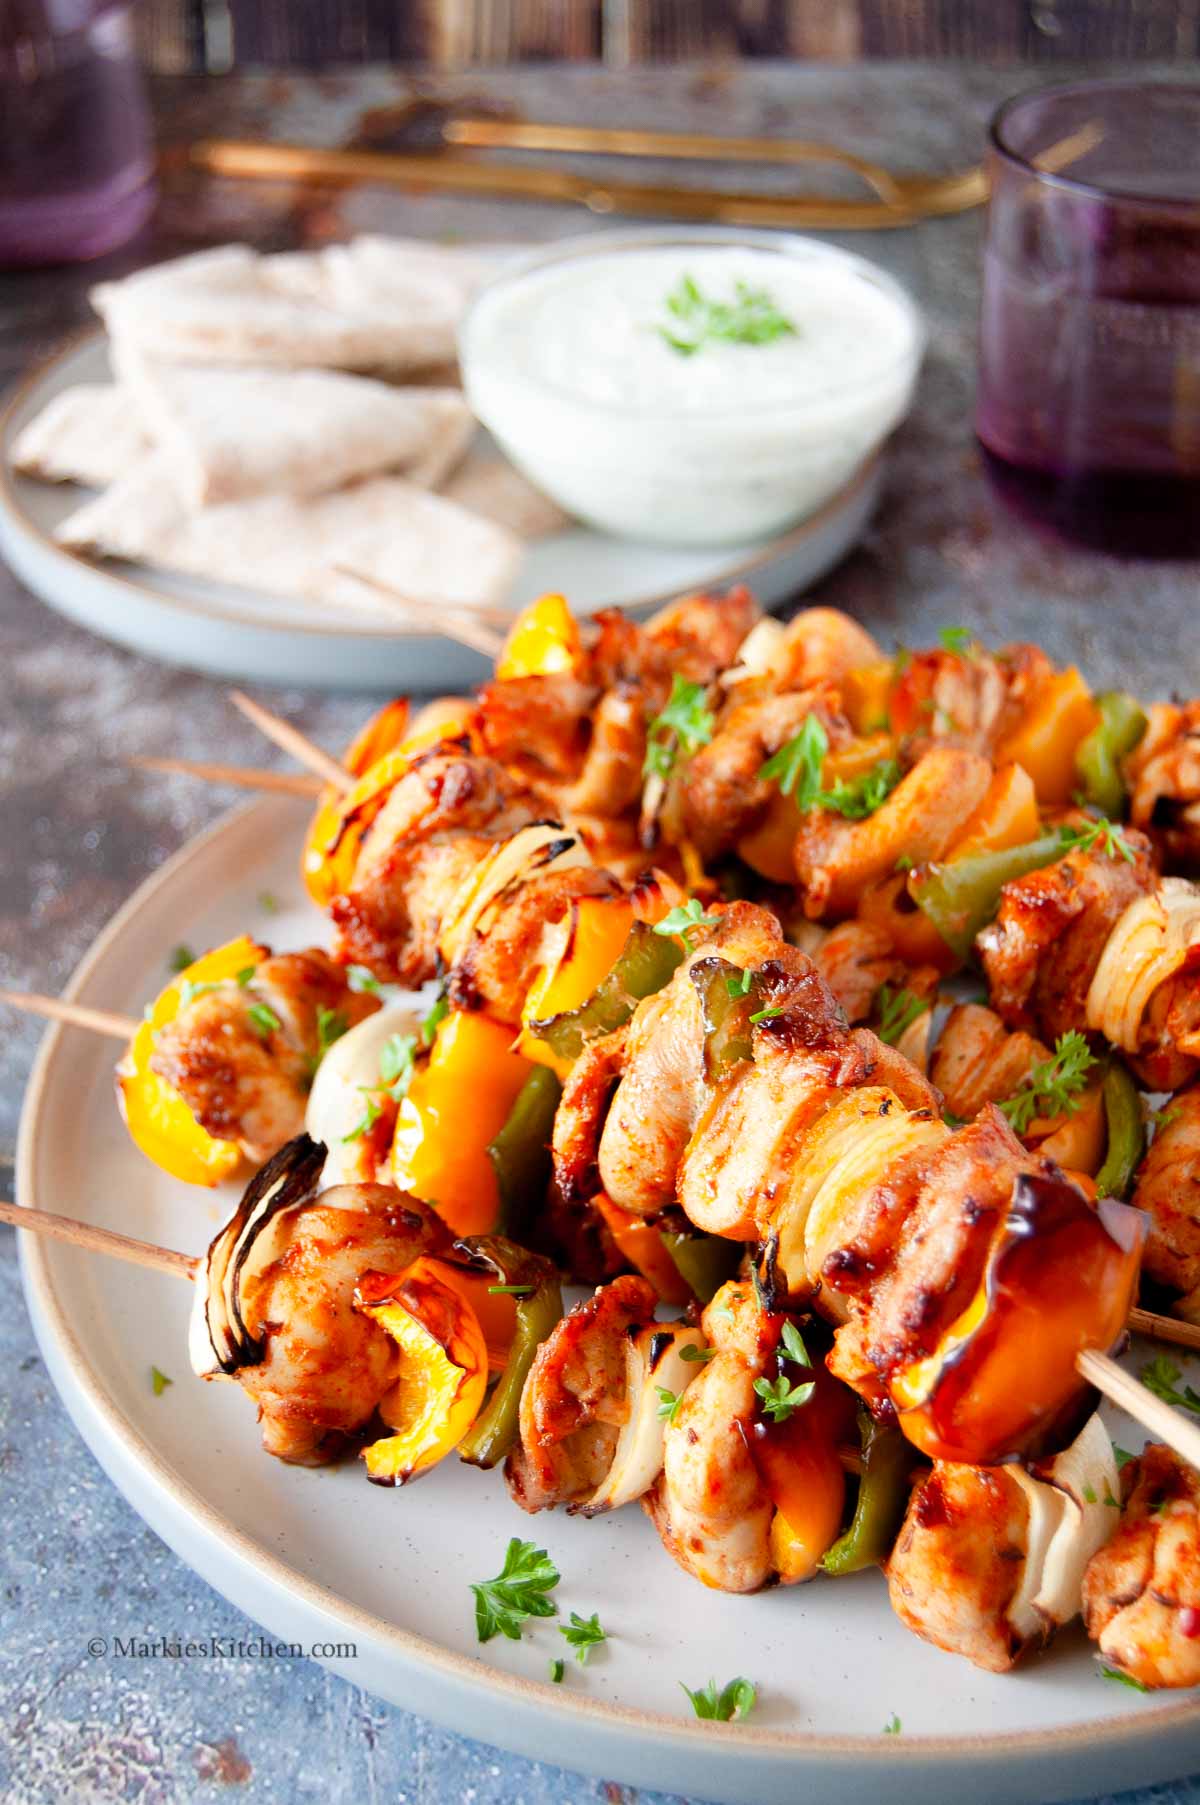 A photo of a plate with stacked chicken kebabs with vegetables. In the background, there is a plate with flatbread and a bowl of yogurt sauce, couple of purple glasses and cutlery.